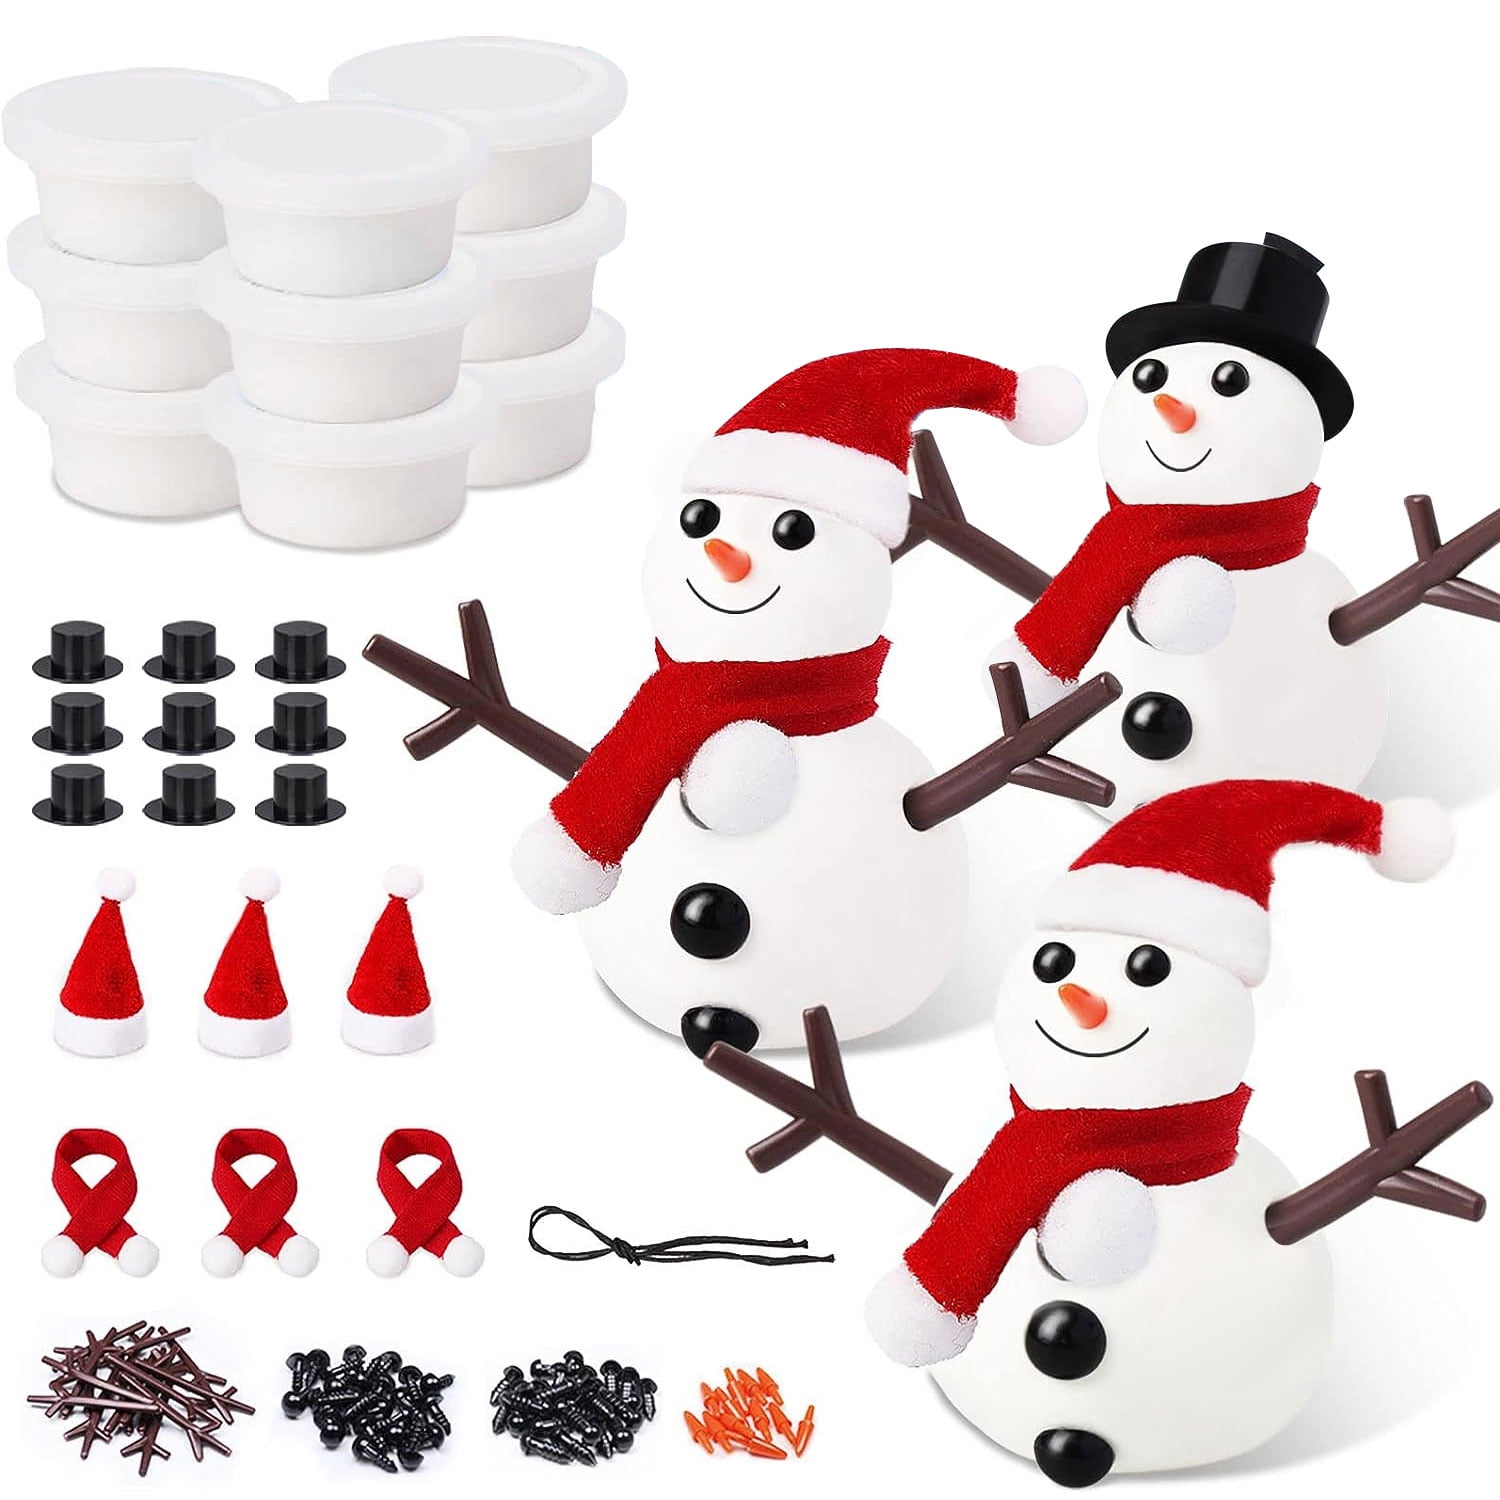 Snowman Making Kit for Kids - Build a Snow Man Craft Kits for Girls, Boys,  Toddlers Ages 3+ Kid Winter Christmas Crafts Activities Stocking Stuffers